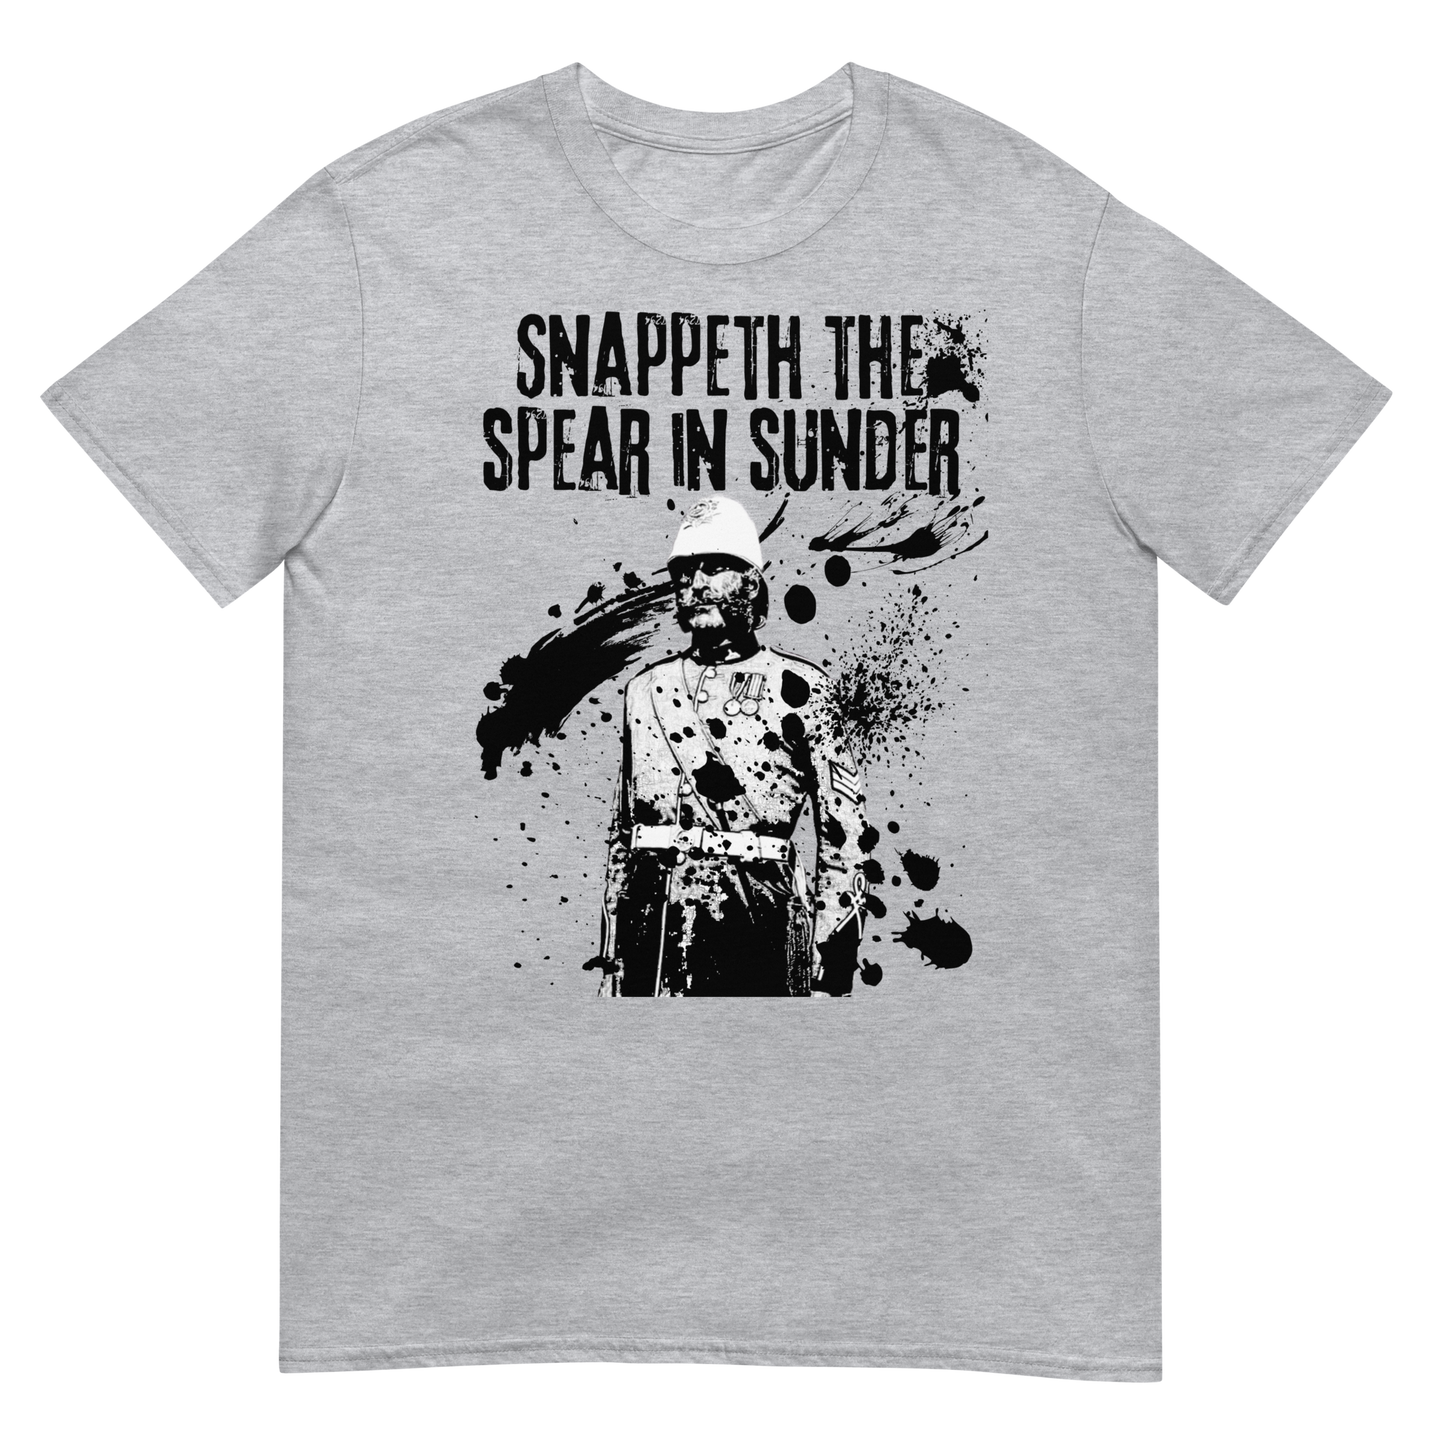 Snappeth The Spear In Sunder (t-shirt)